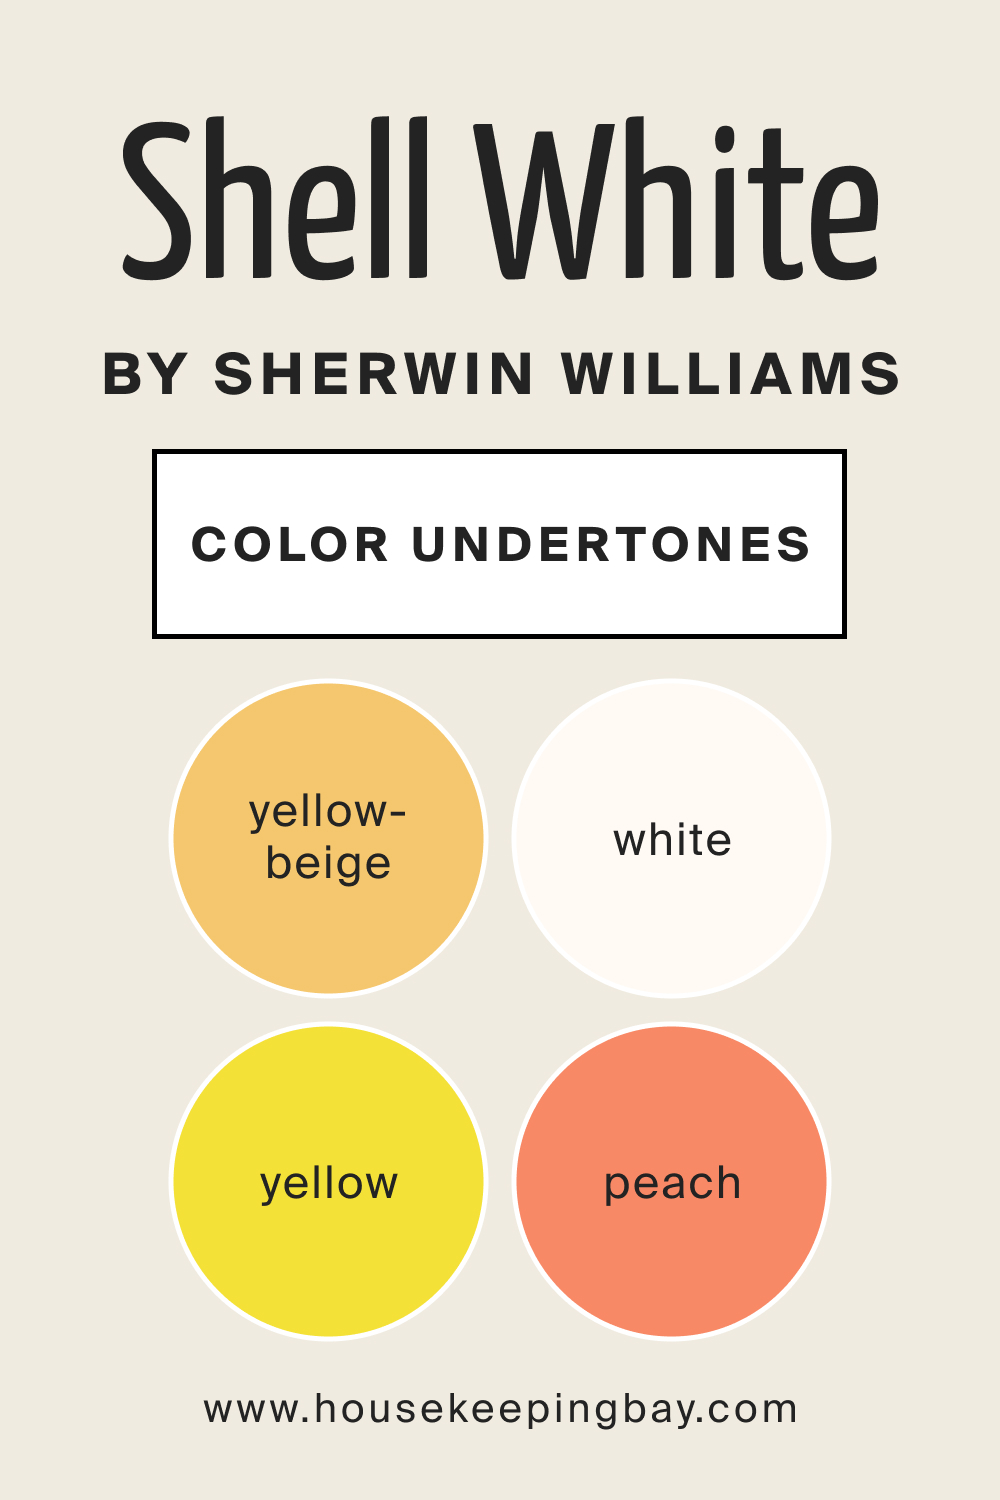 SW Shell White by Sherwin Williams Color Undertone